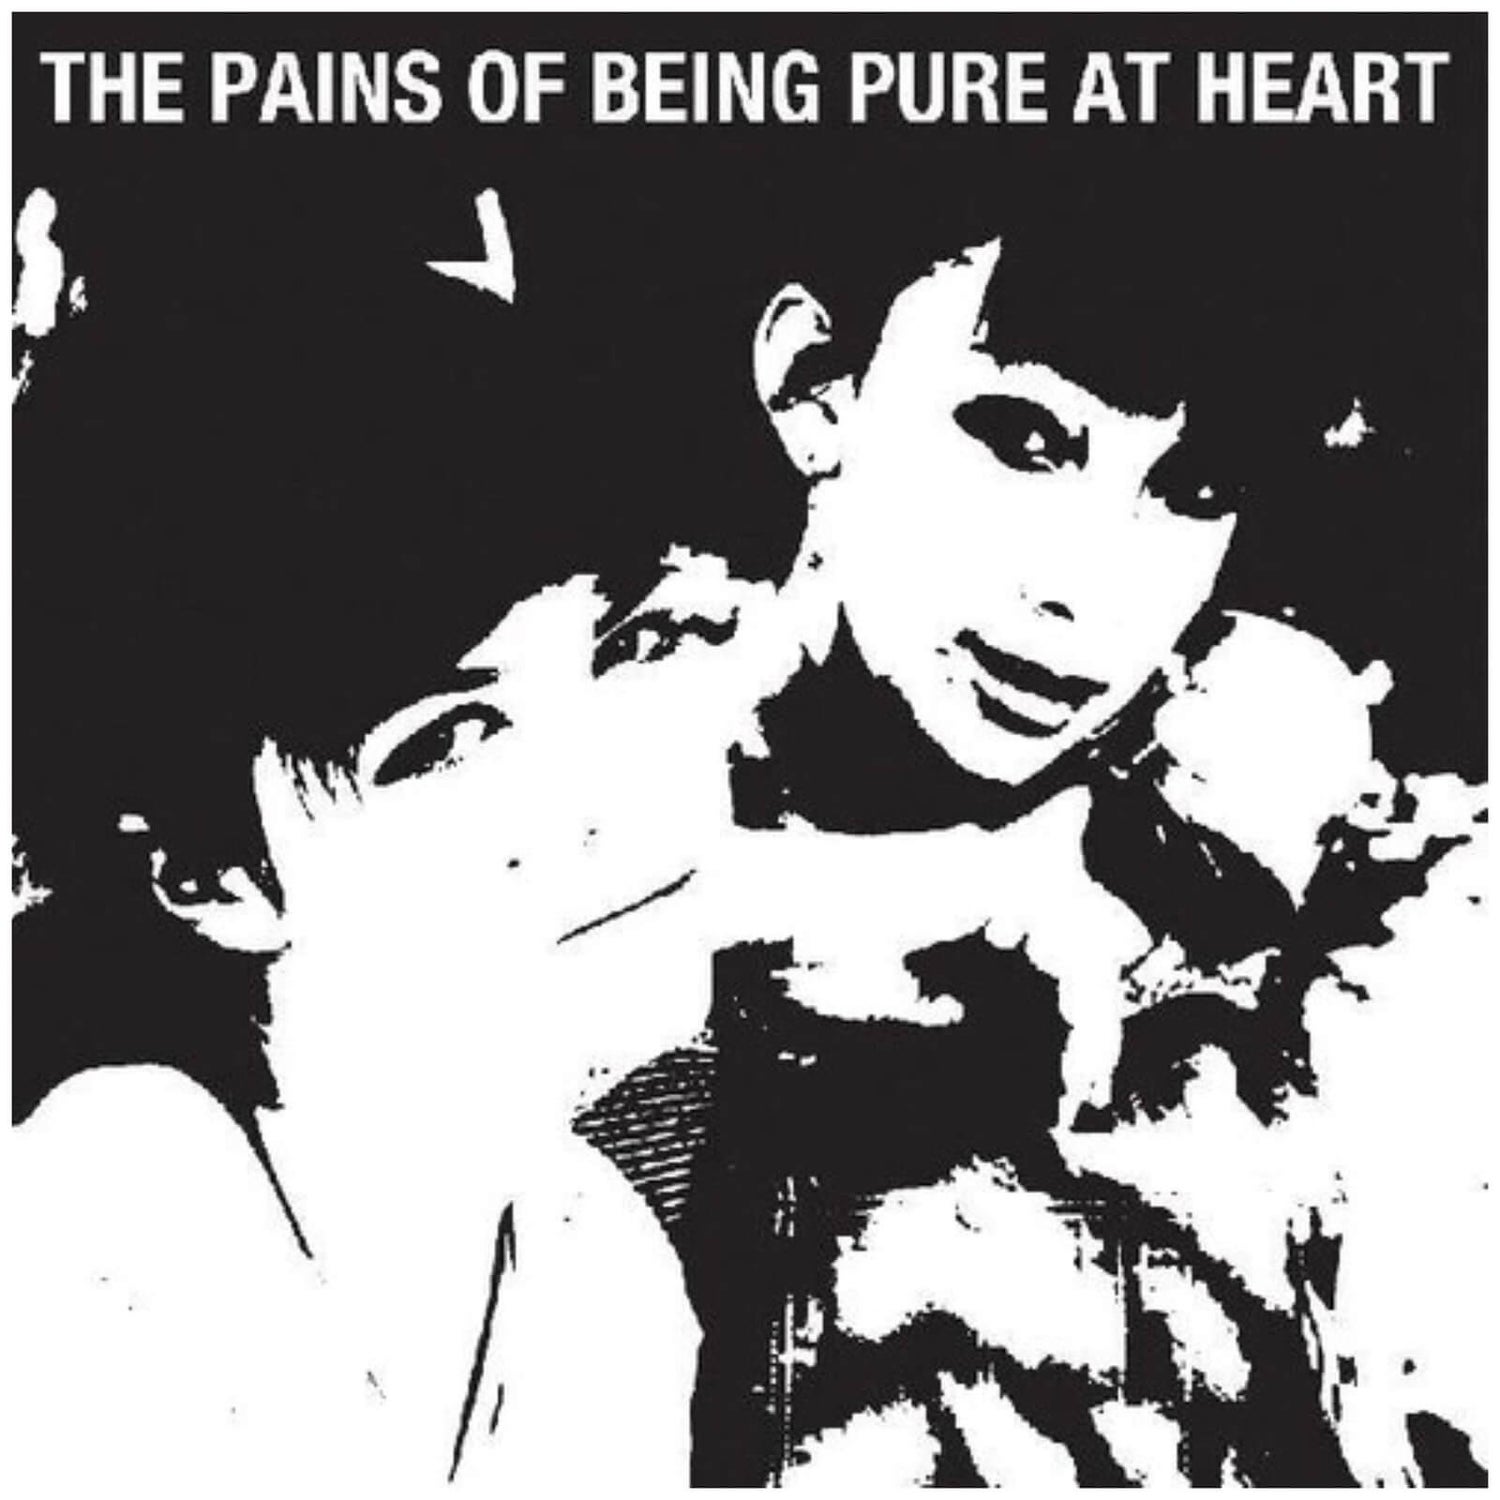 The Pains of Being Pure At Heart - The Pains of Being Pure at Heart Vinyl (White, Yellow & Pink)